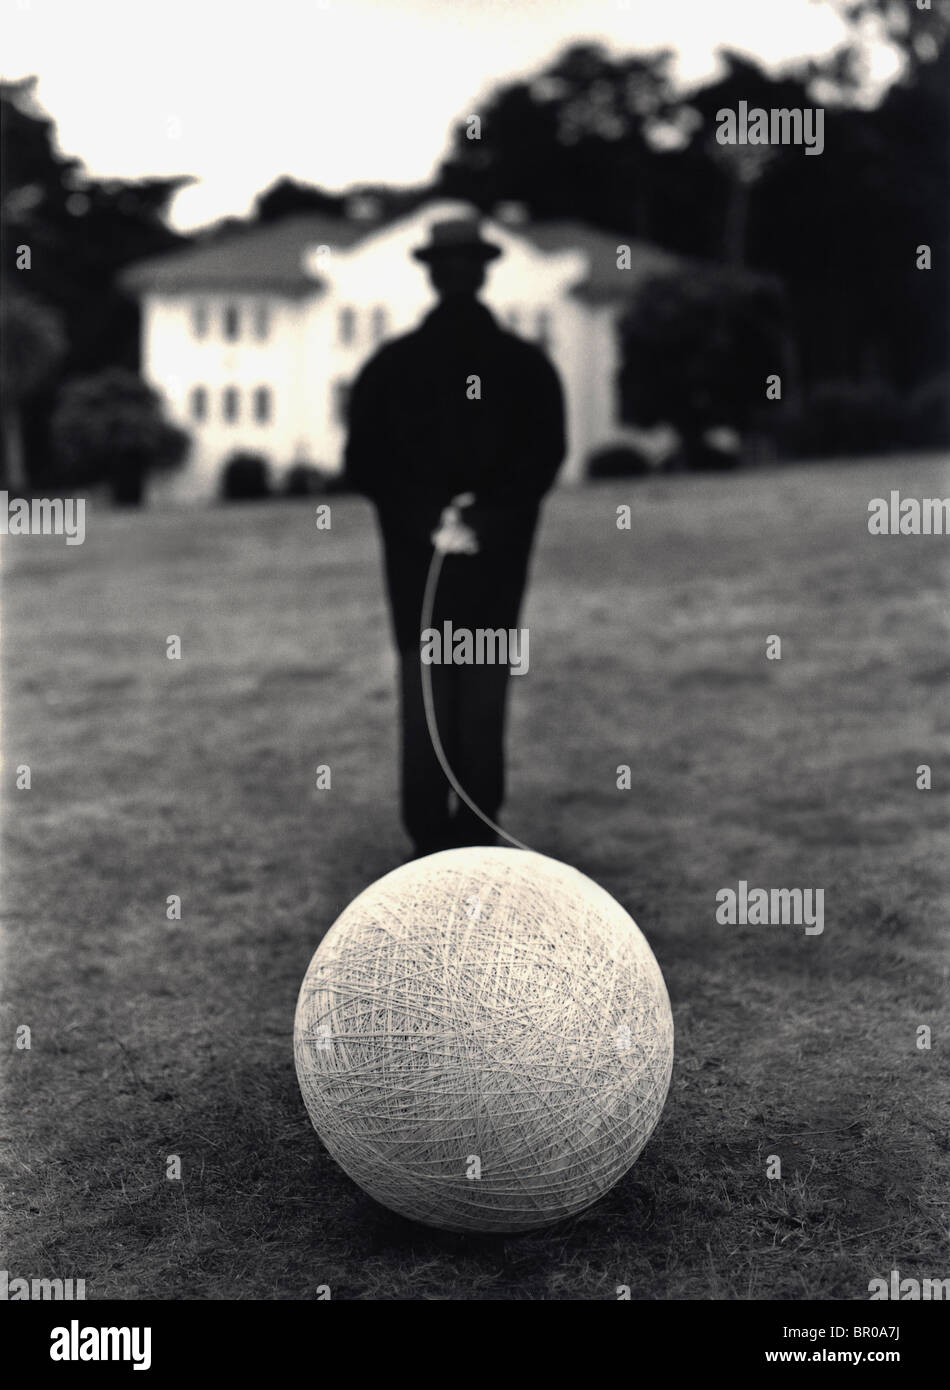 Executive 'man on suit'  Caucasian man black and white suit  holding a ball of string Stock Photo